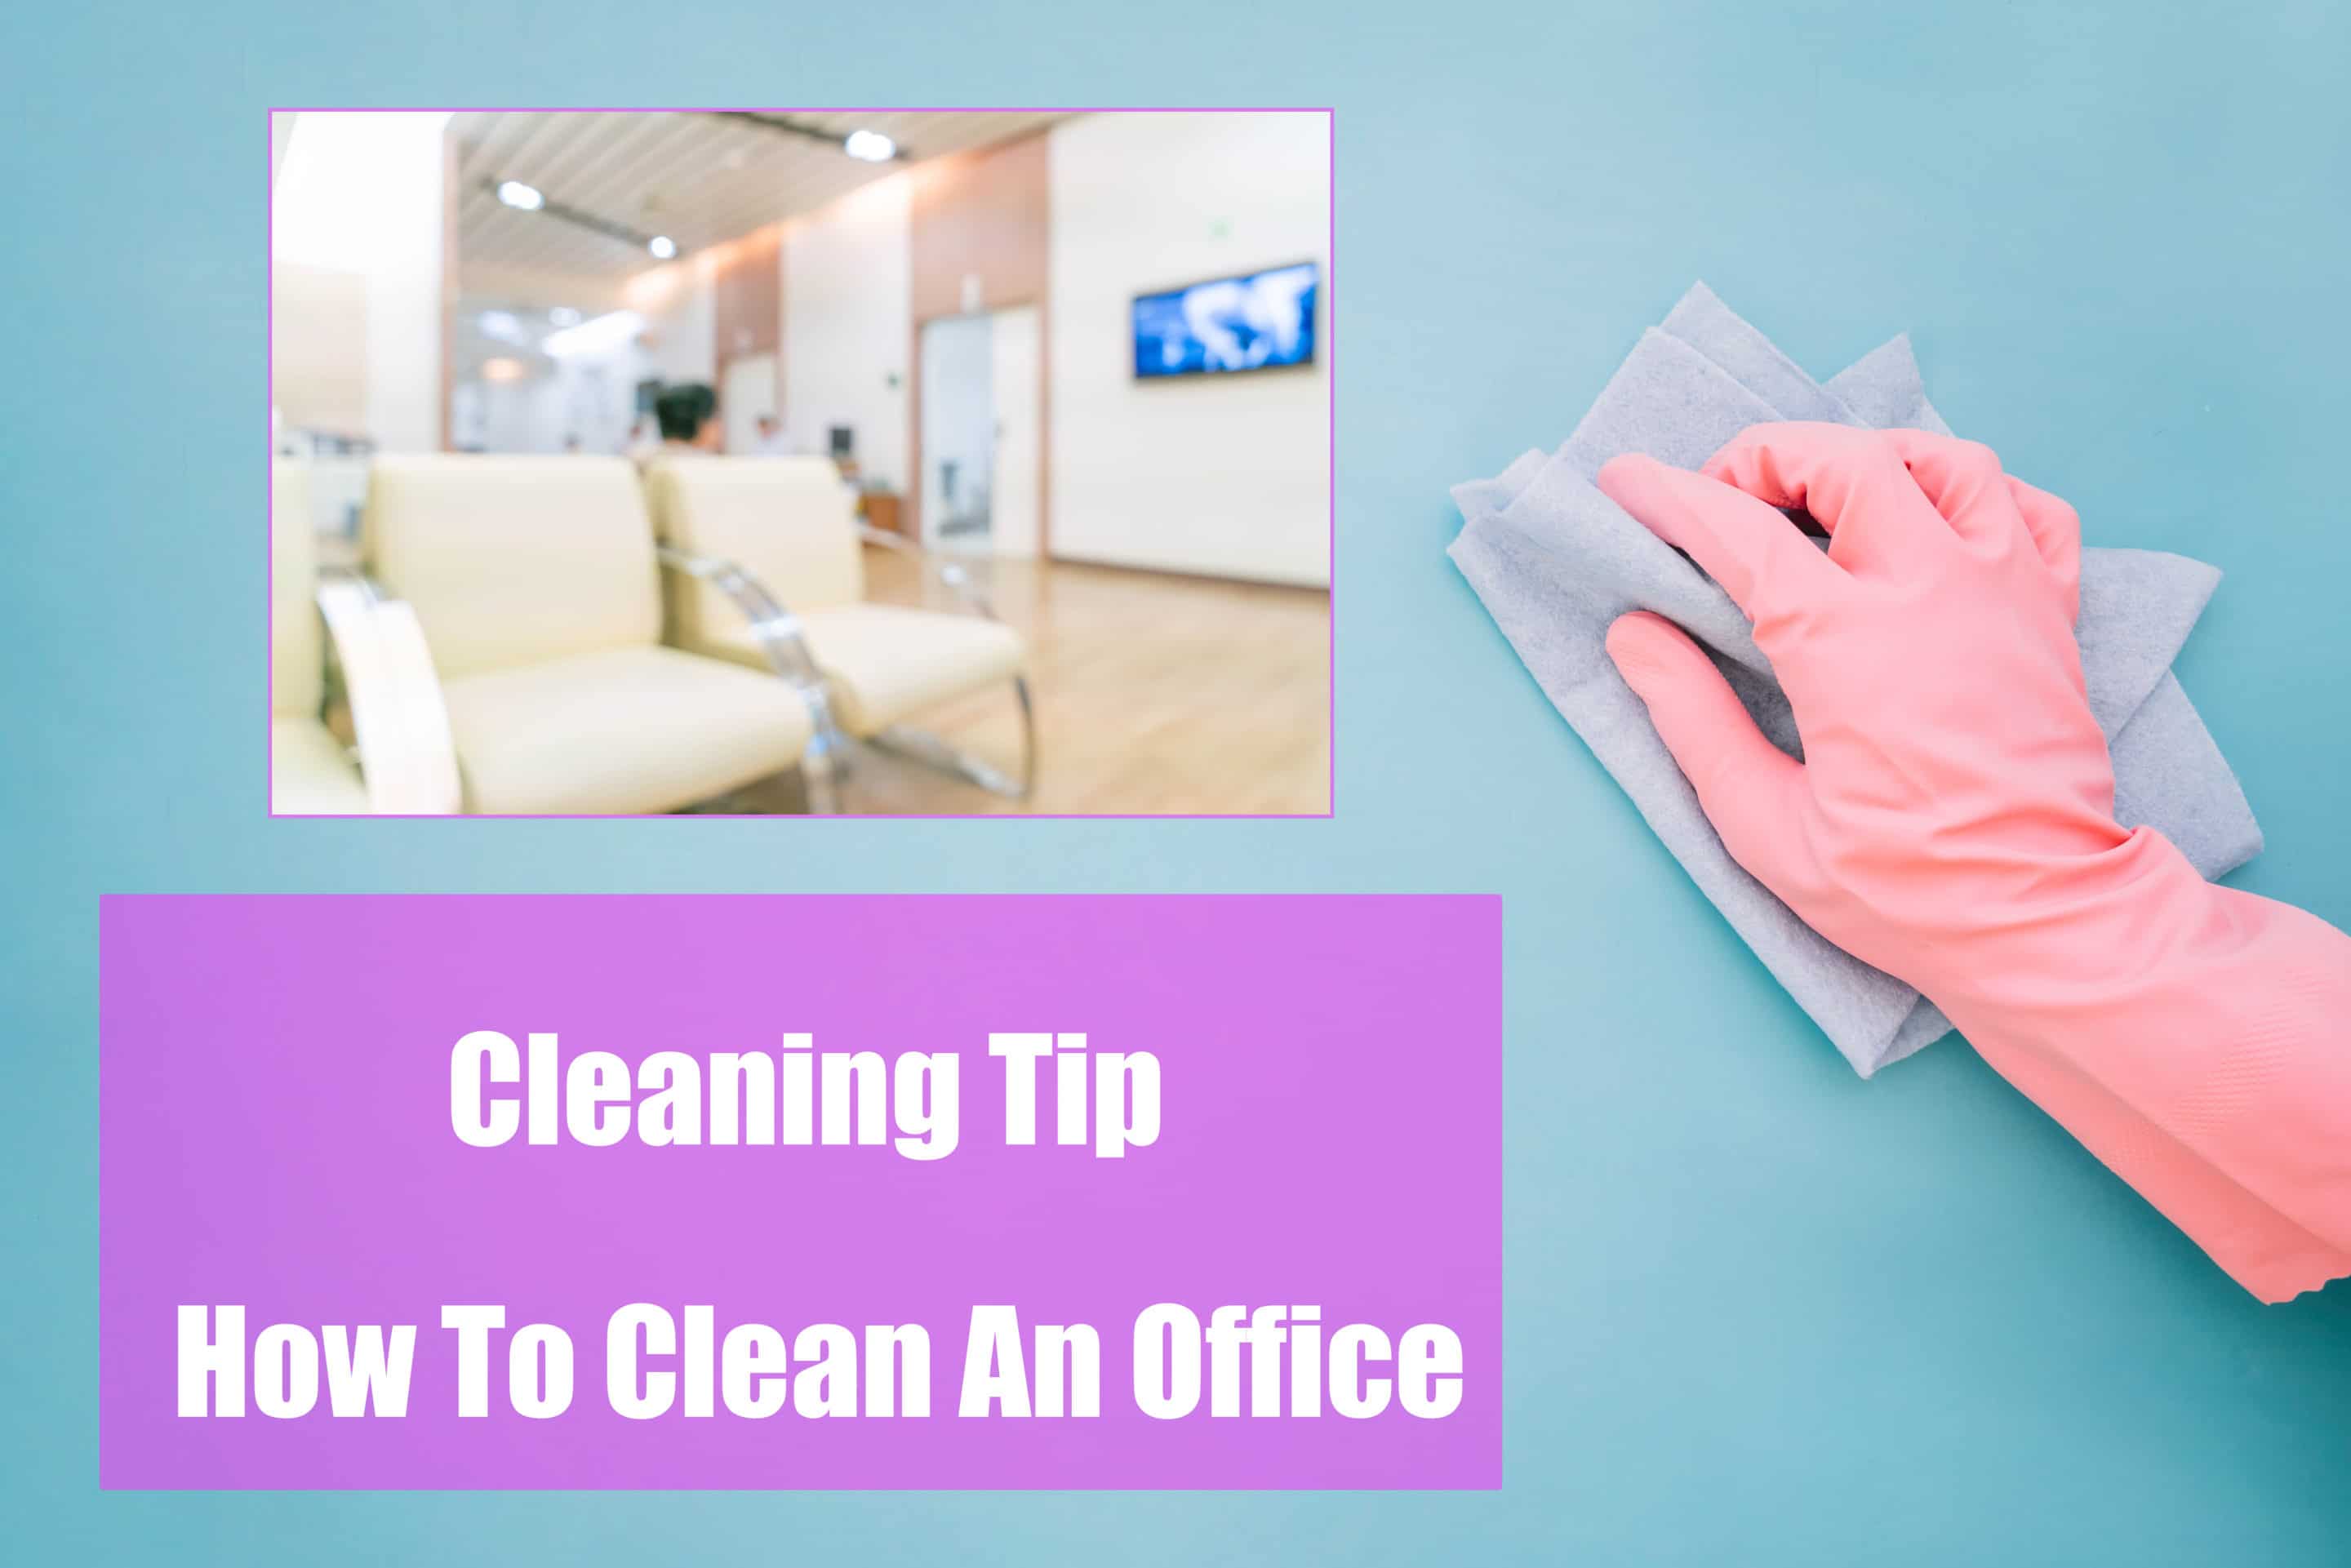 Cleaning office